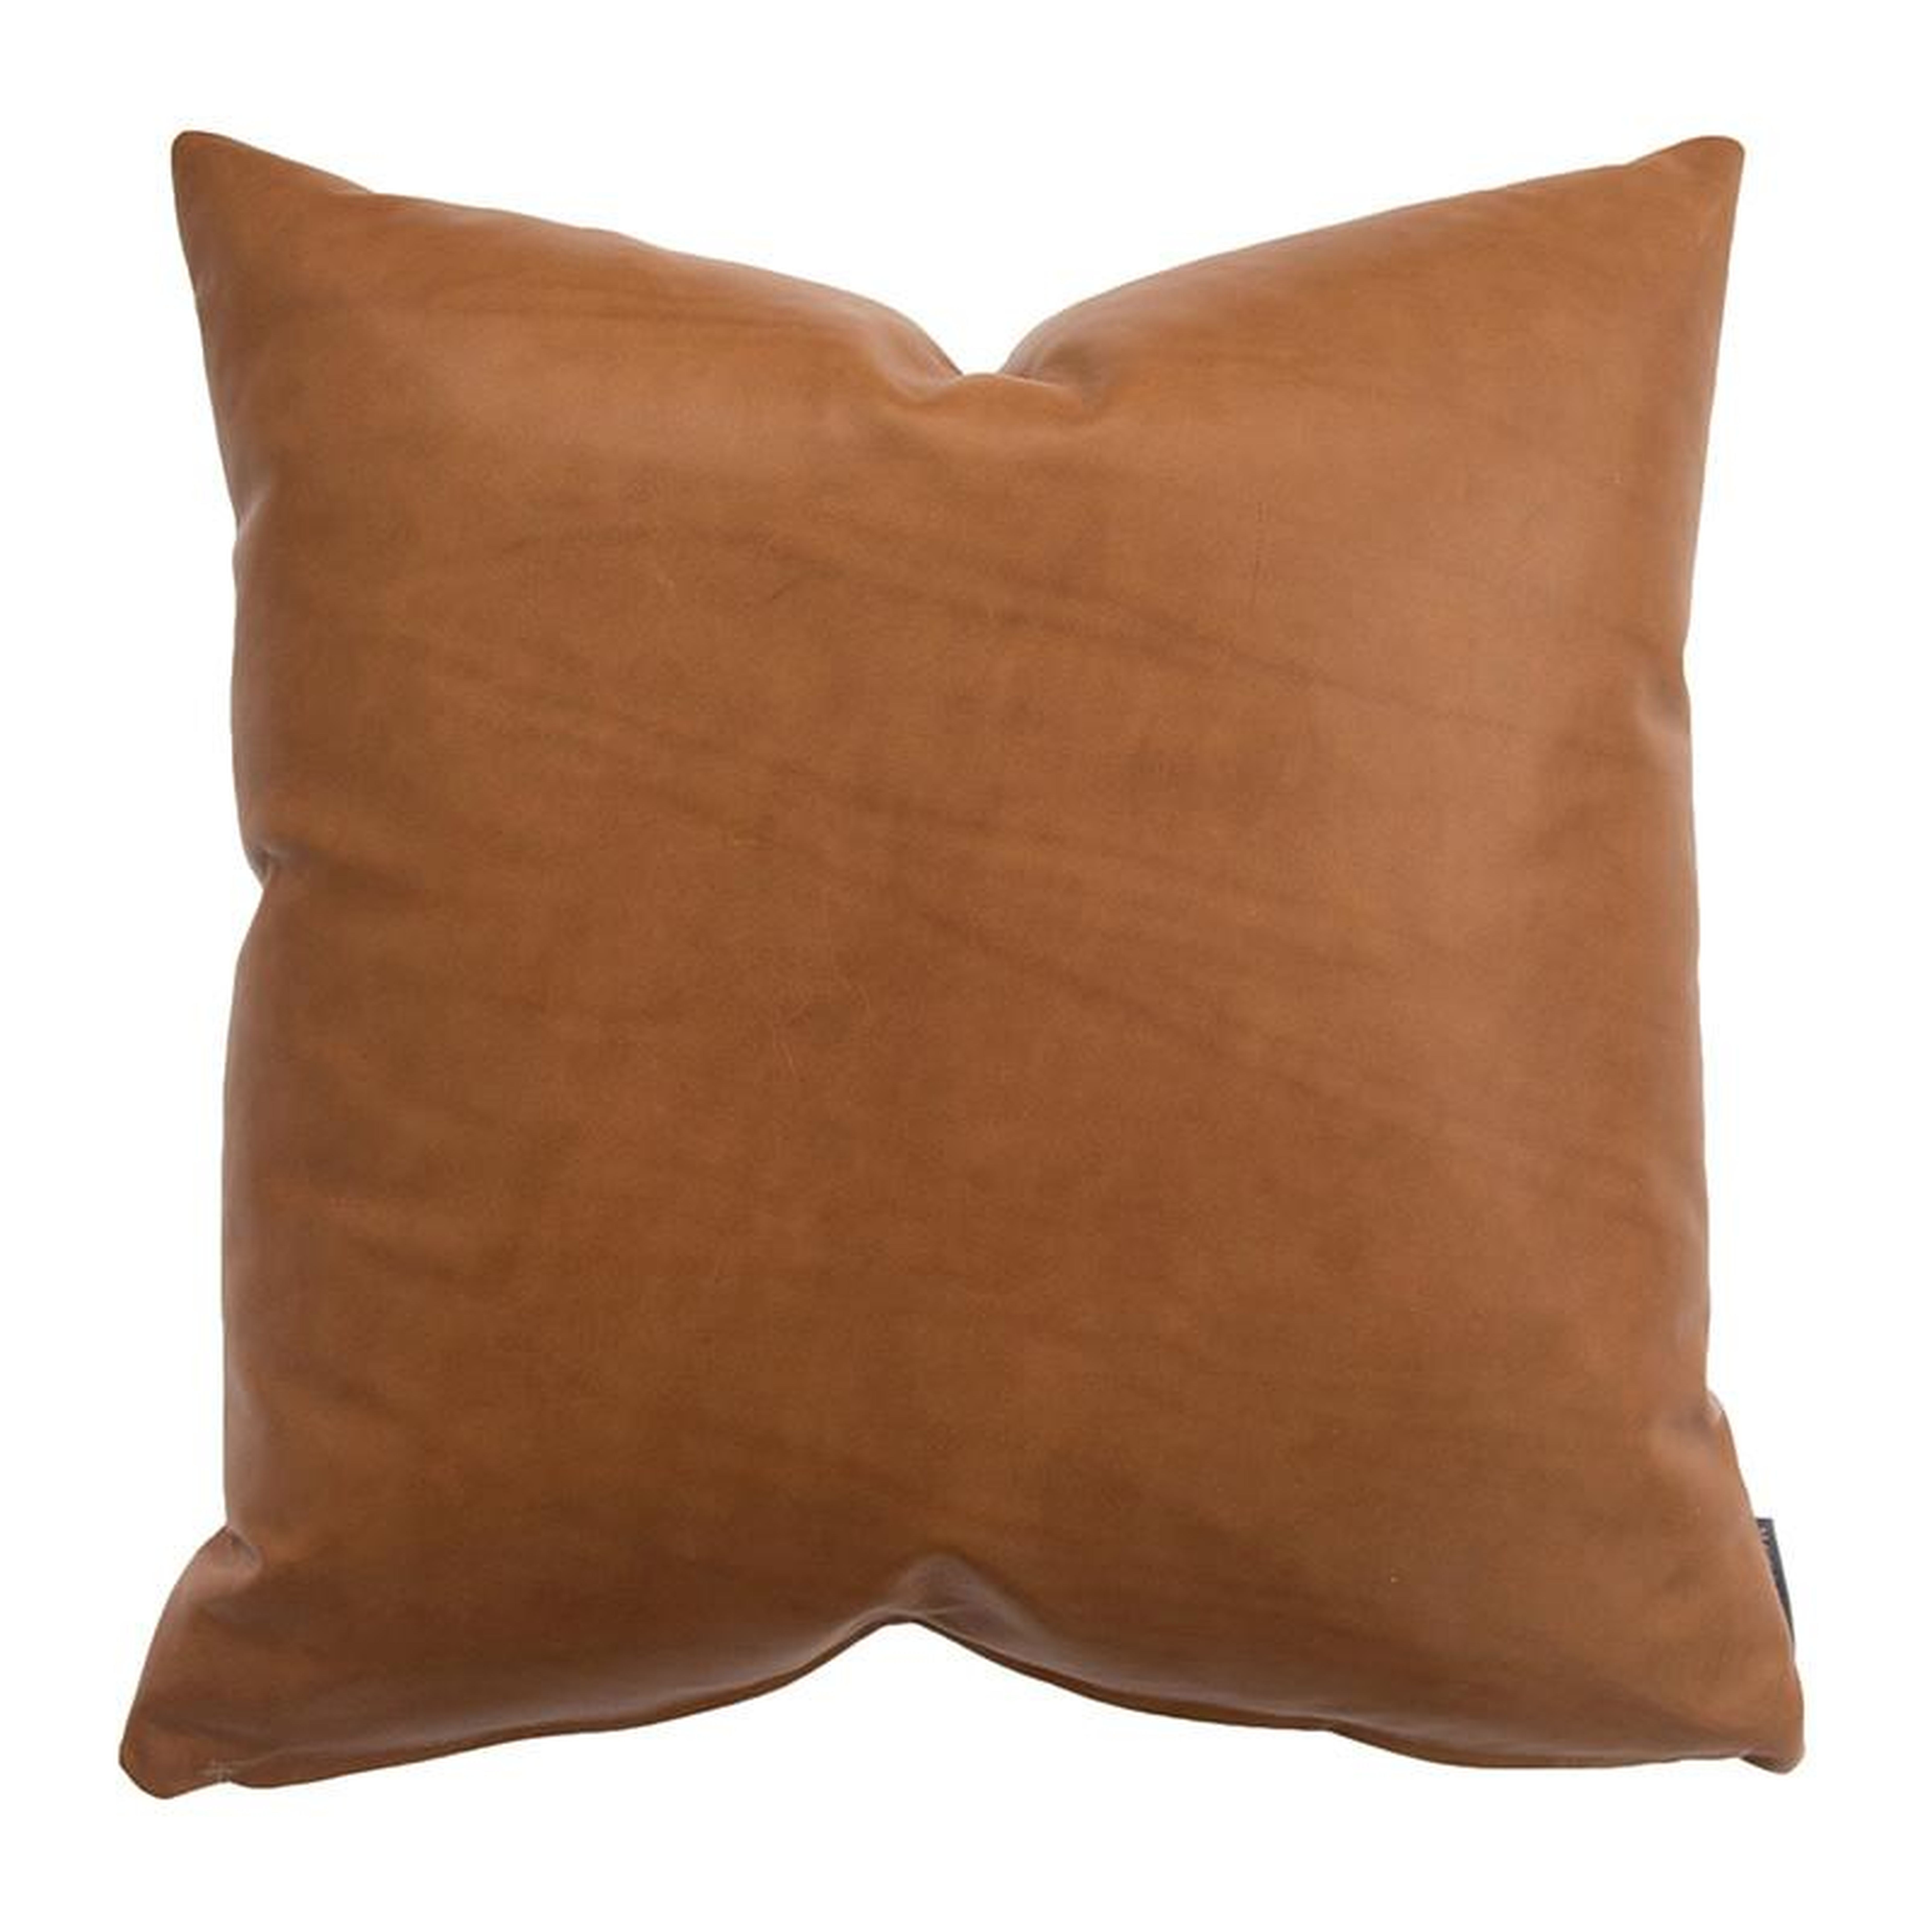 COGNAC LEATHER PILLOW COVER WITH DOWN INSERT, 22" x 22" - McGee & Co.